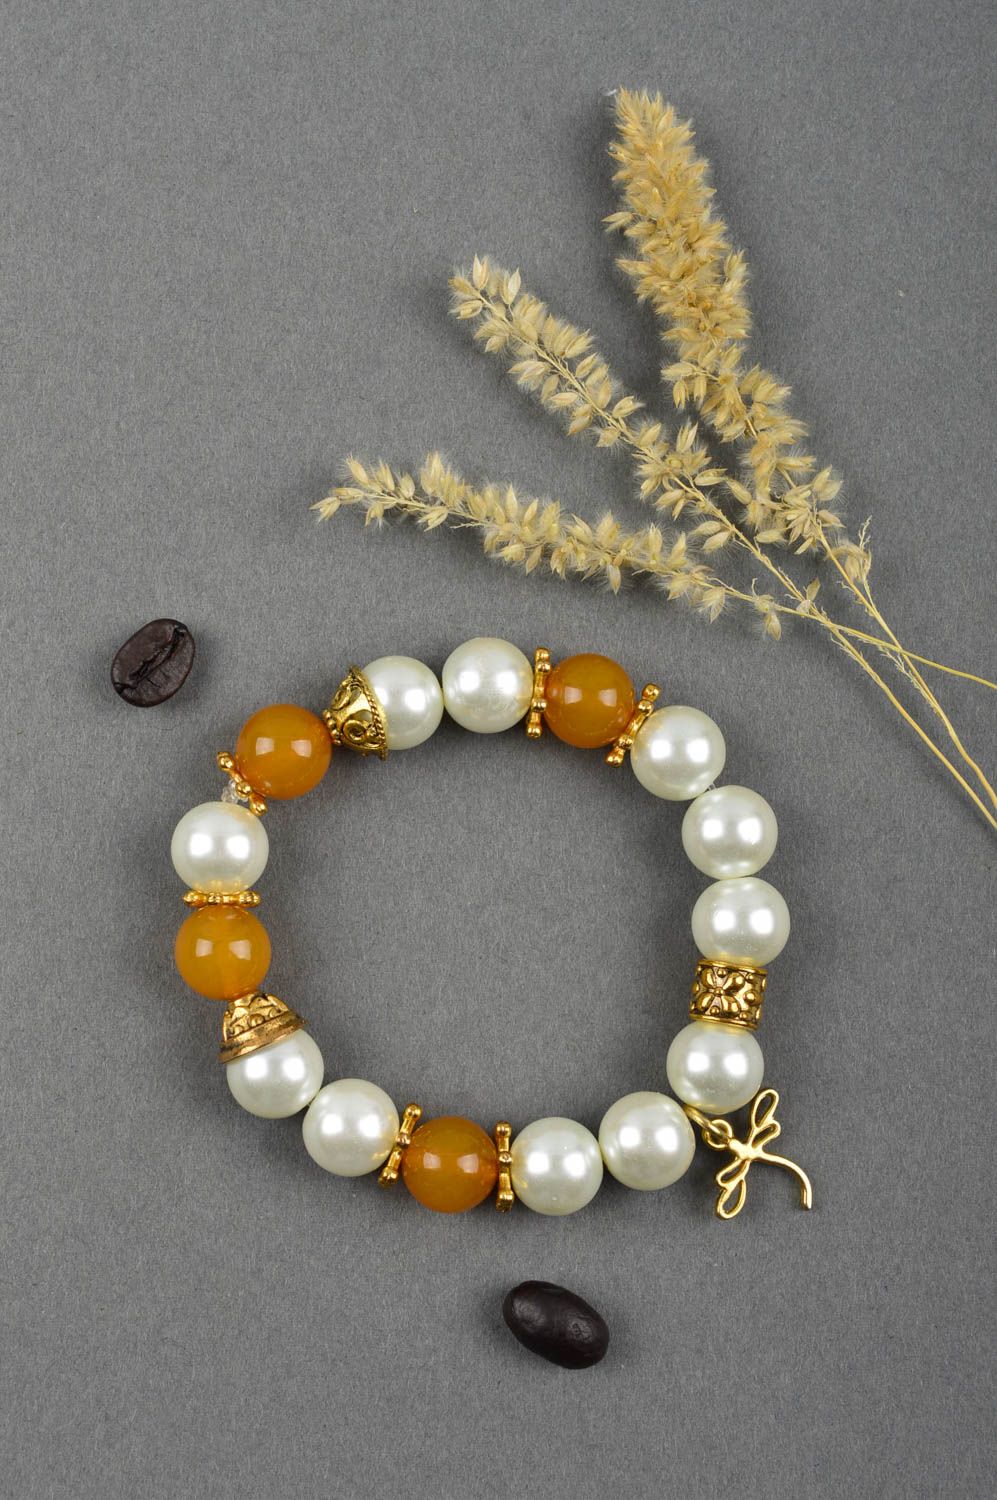 Handcrafted bracelet amber and white beads fashion designer wrist accessory photo 1